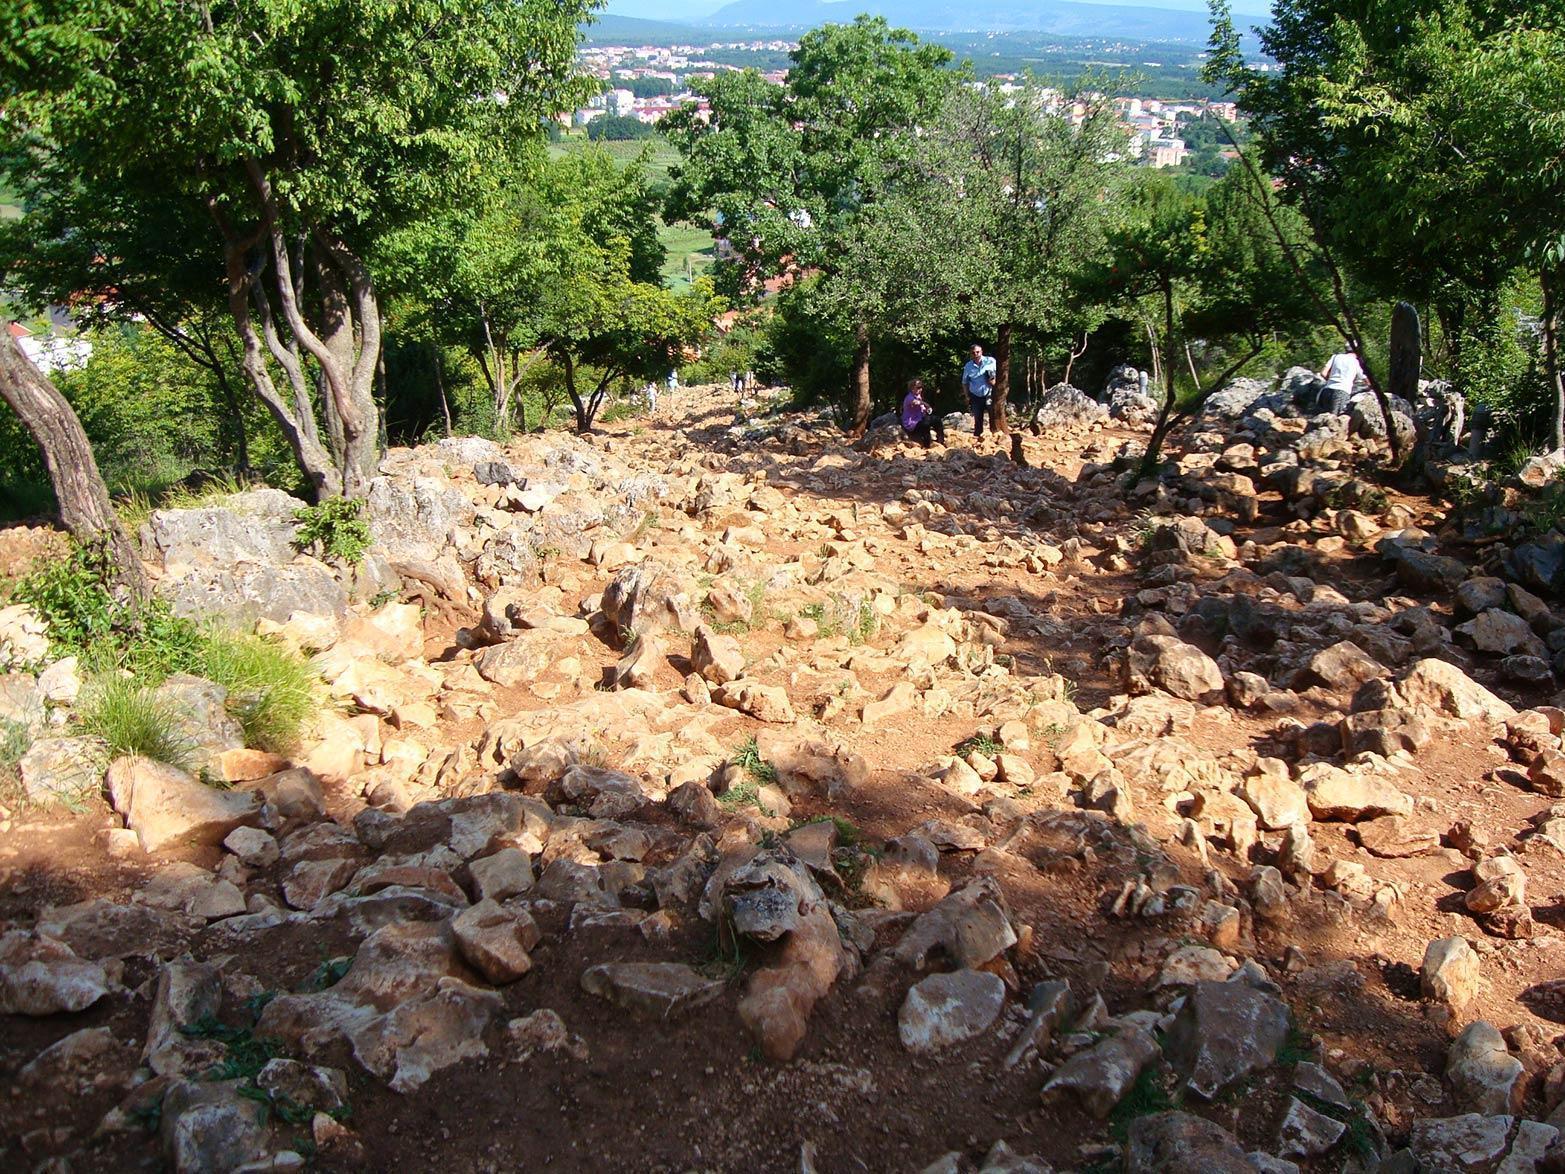 Medjugorje is a town in Bosnia and Herzegovina as Blue Shark day trip